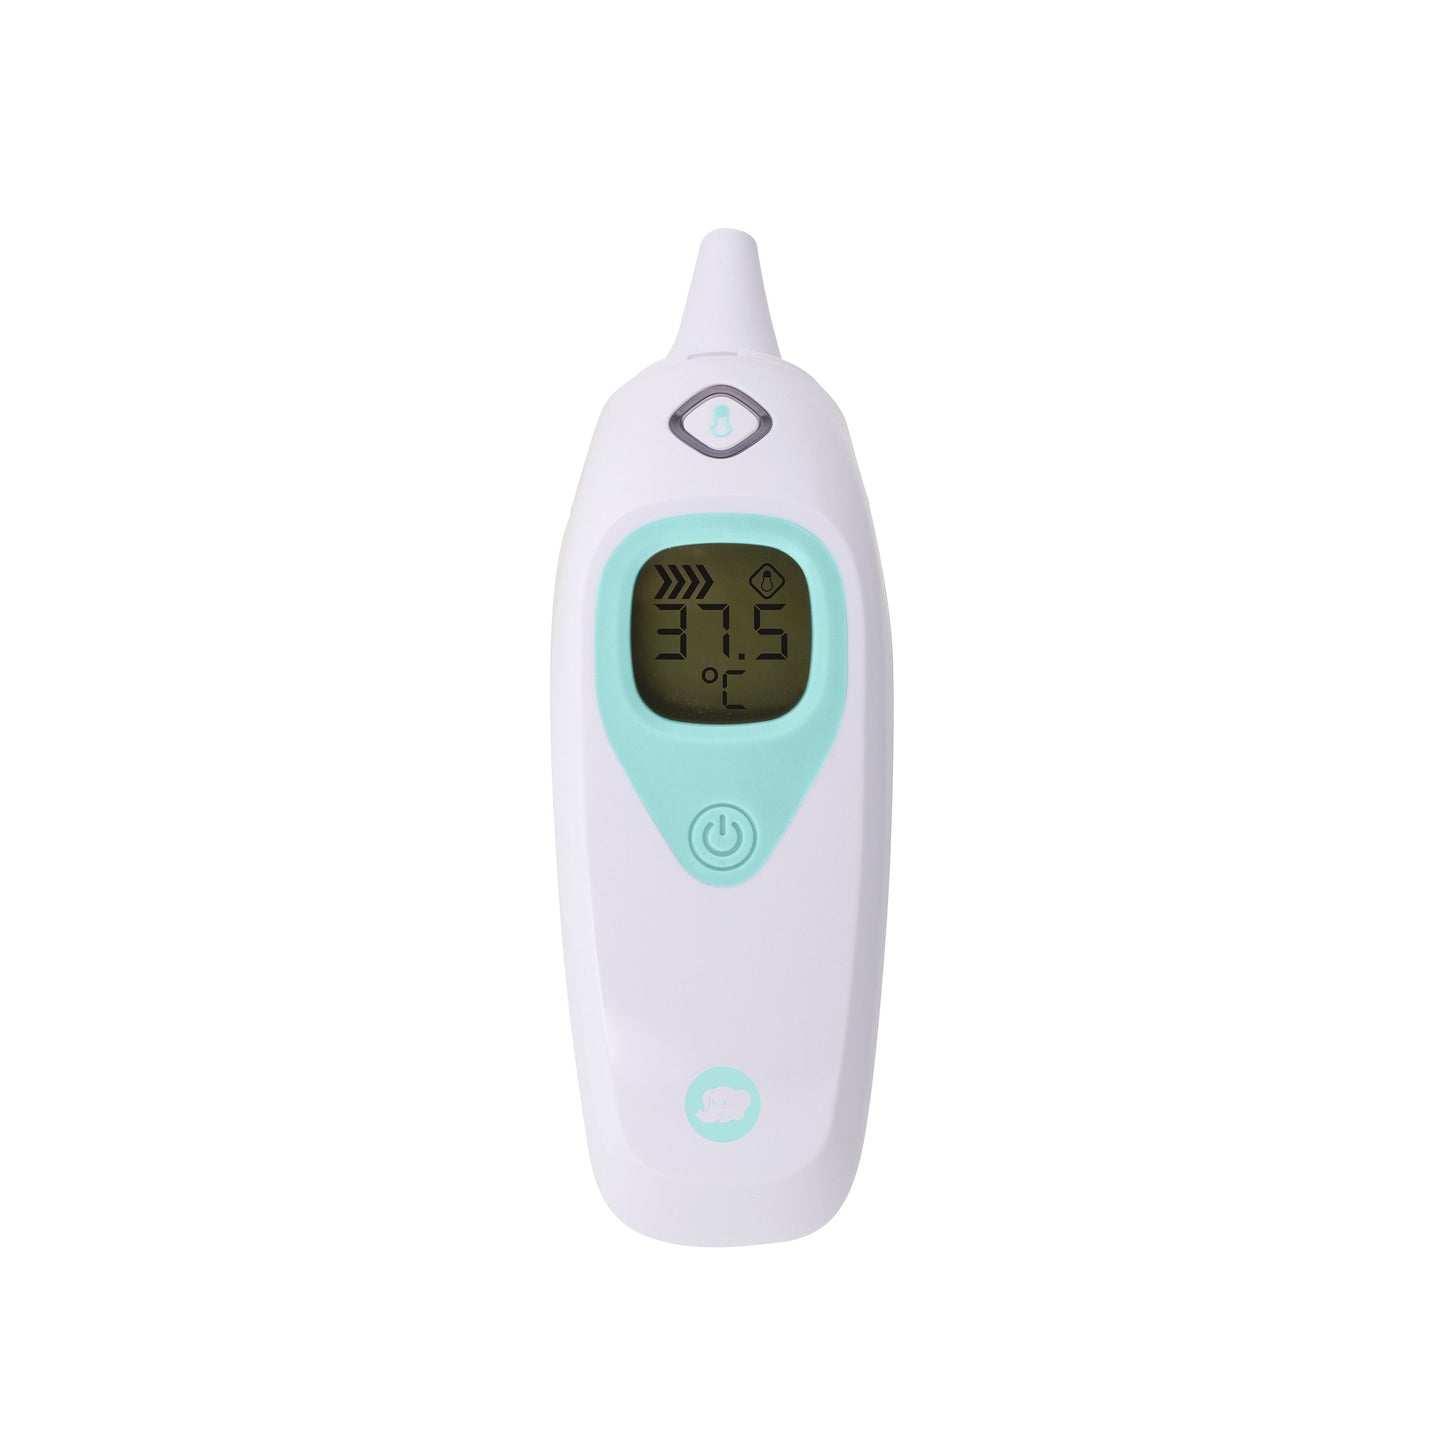 Bebeconfort Ear Thermometer